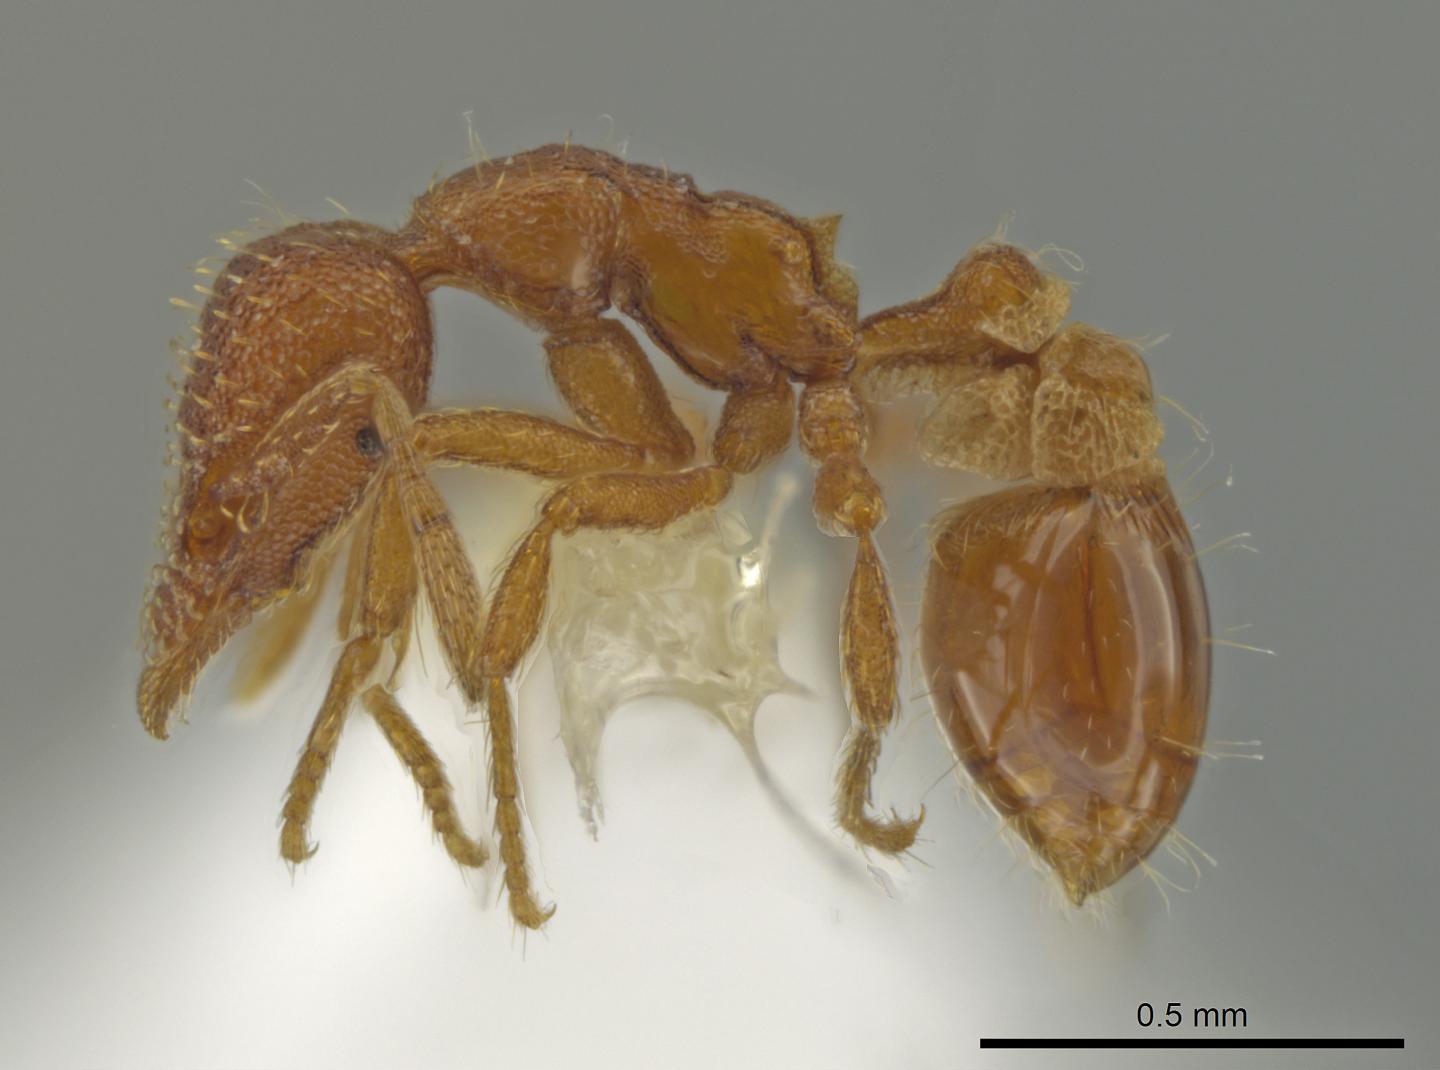 Strumigenys Ananeotes